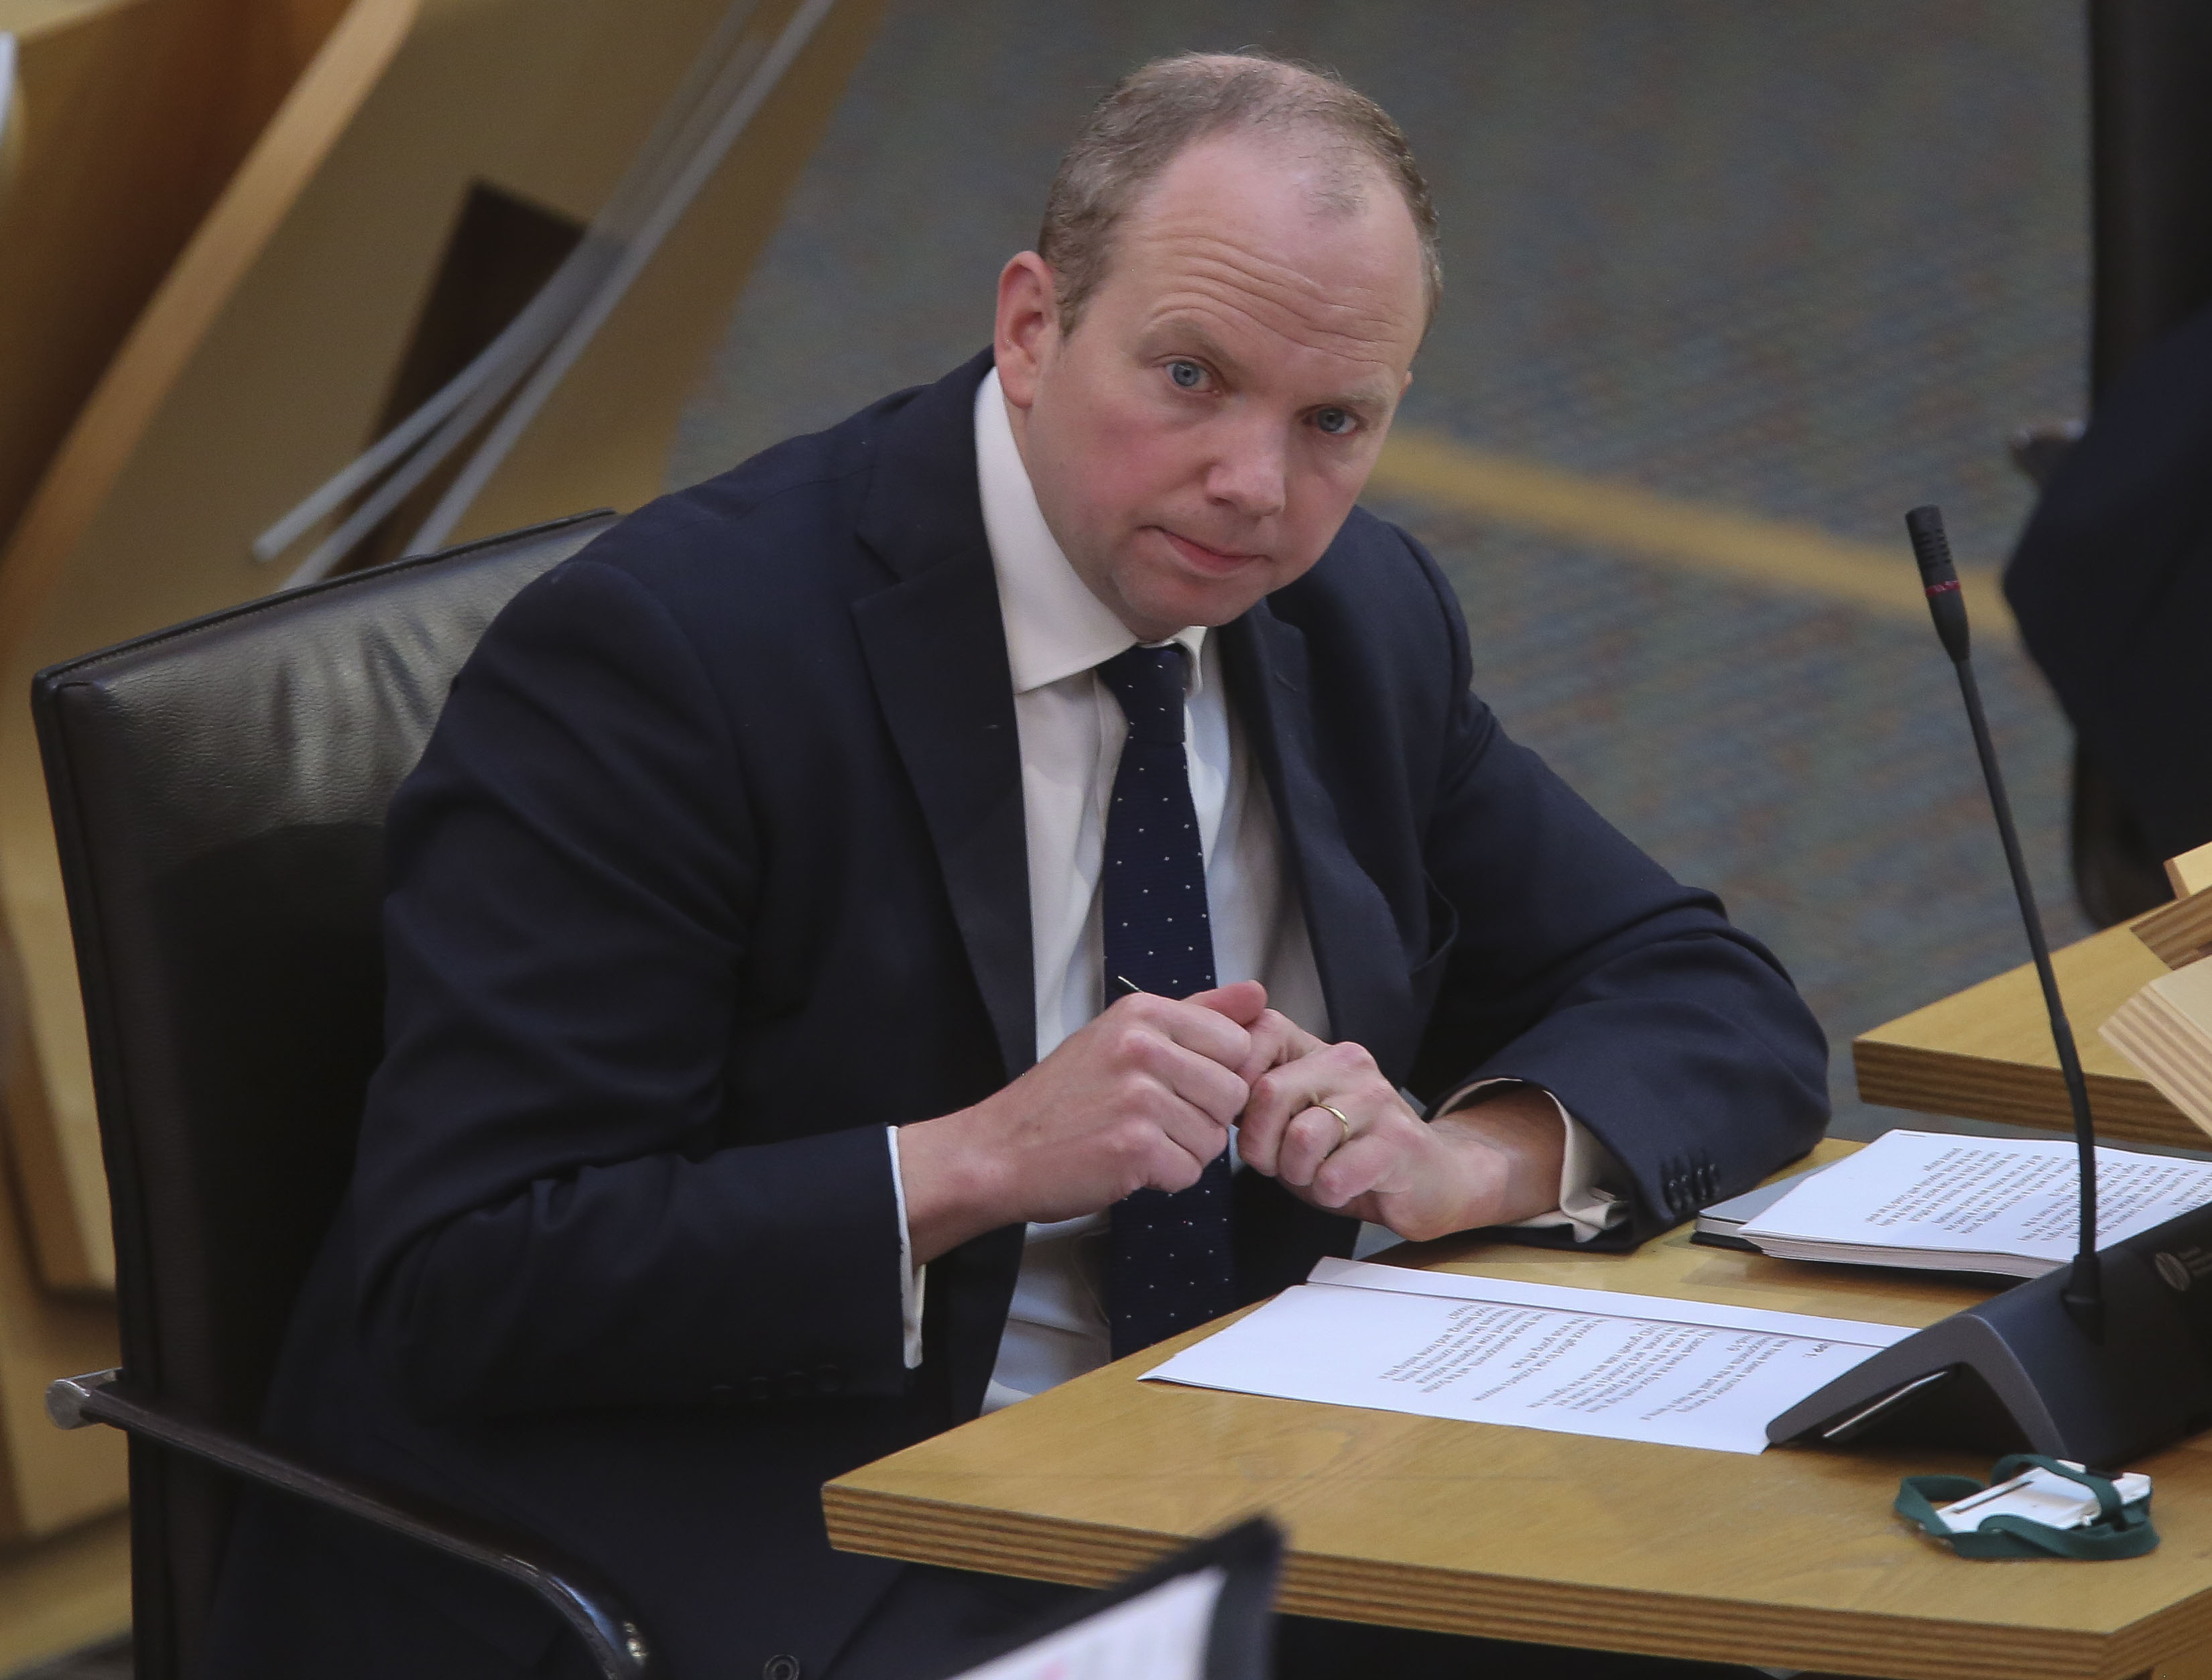 tory msp stands down from holyrood to take up position at scotland office